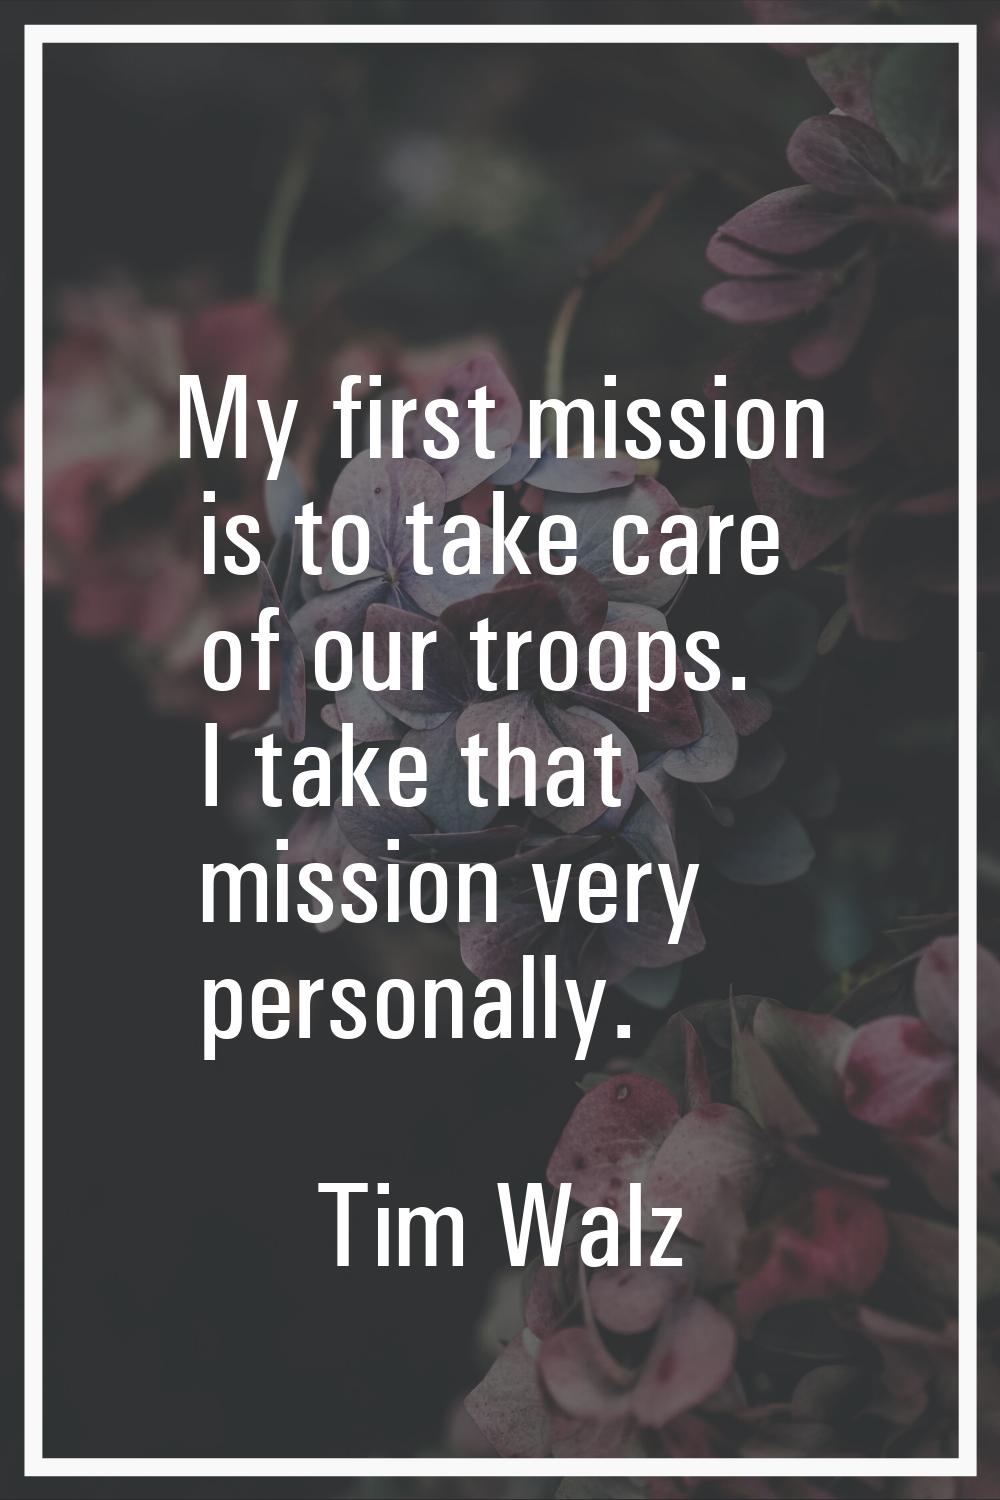 My first mission is to take care of our troops. I take that mission very personally.